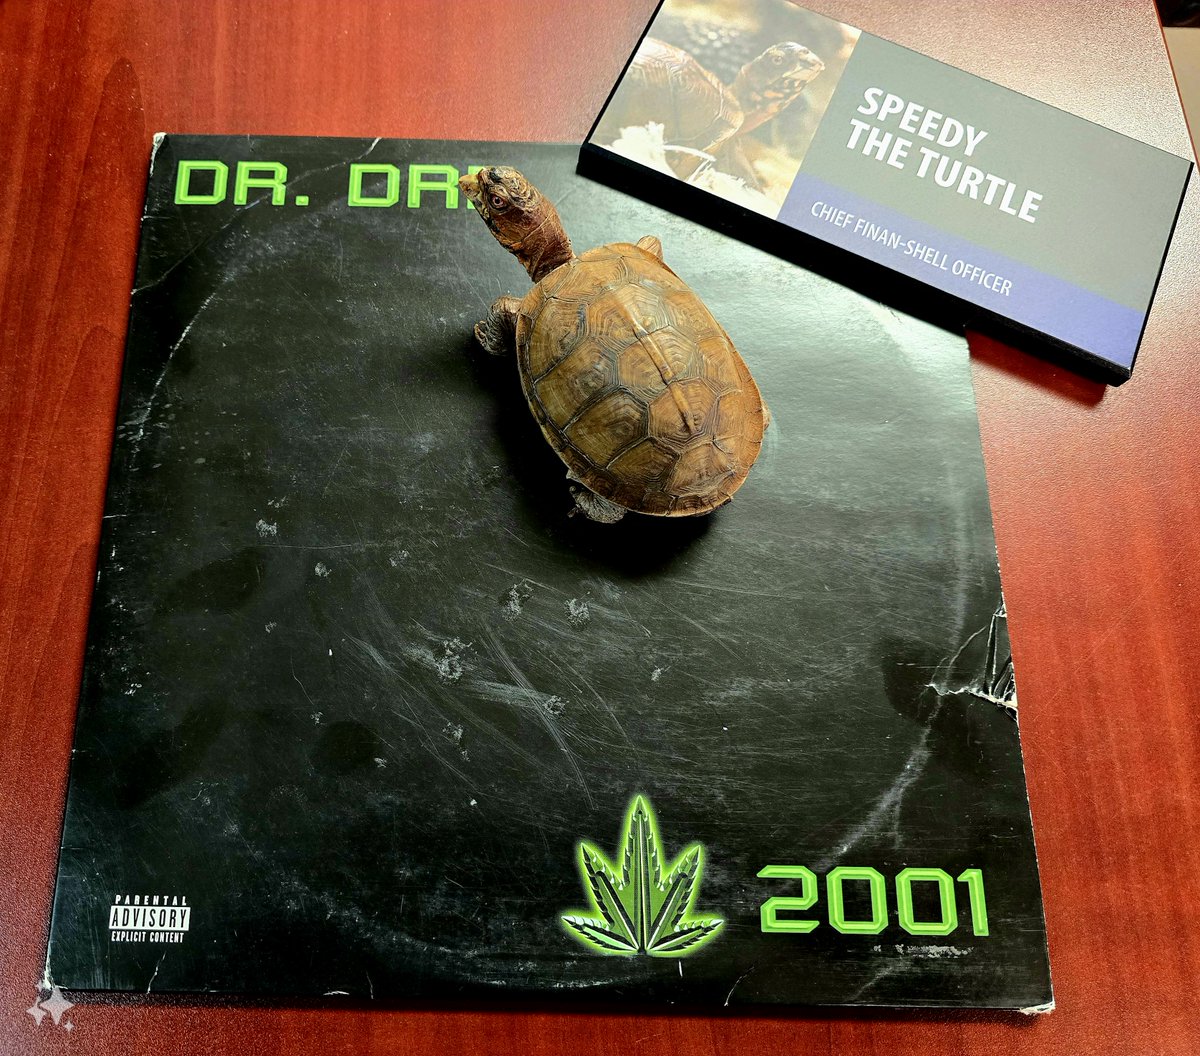 At Fluance, music isn't just a passion—it's a way of life. Happy to share our team's favorite vinyl records.
Meet Speedy The Turtle, our resident music critic! His pick? Dr. Dre's 2001 album! Turtles have great taste in music #StaffPicks #MyFluance #RSD2024 #RESPECTTHERECORD